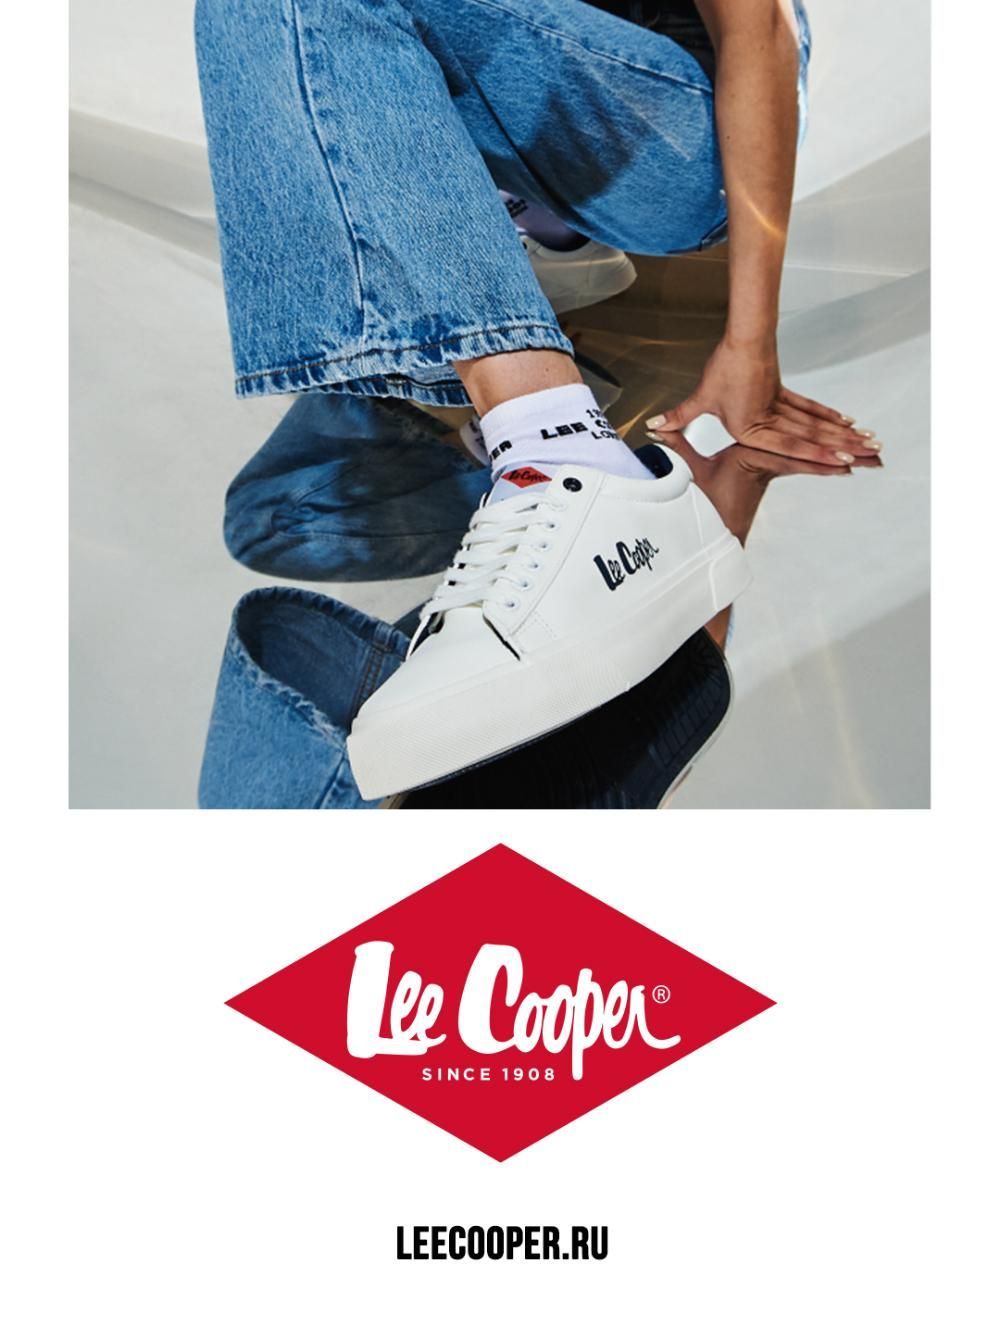 Lee Cooper to present footwear collection for the first time at Euro Shoes